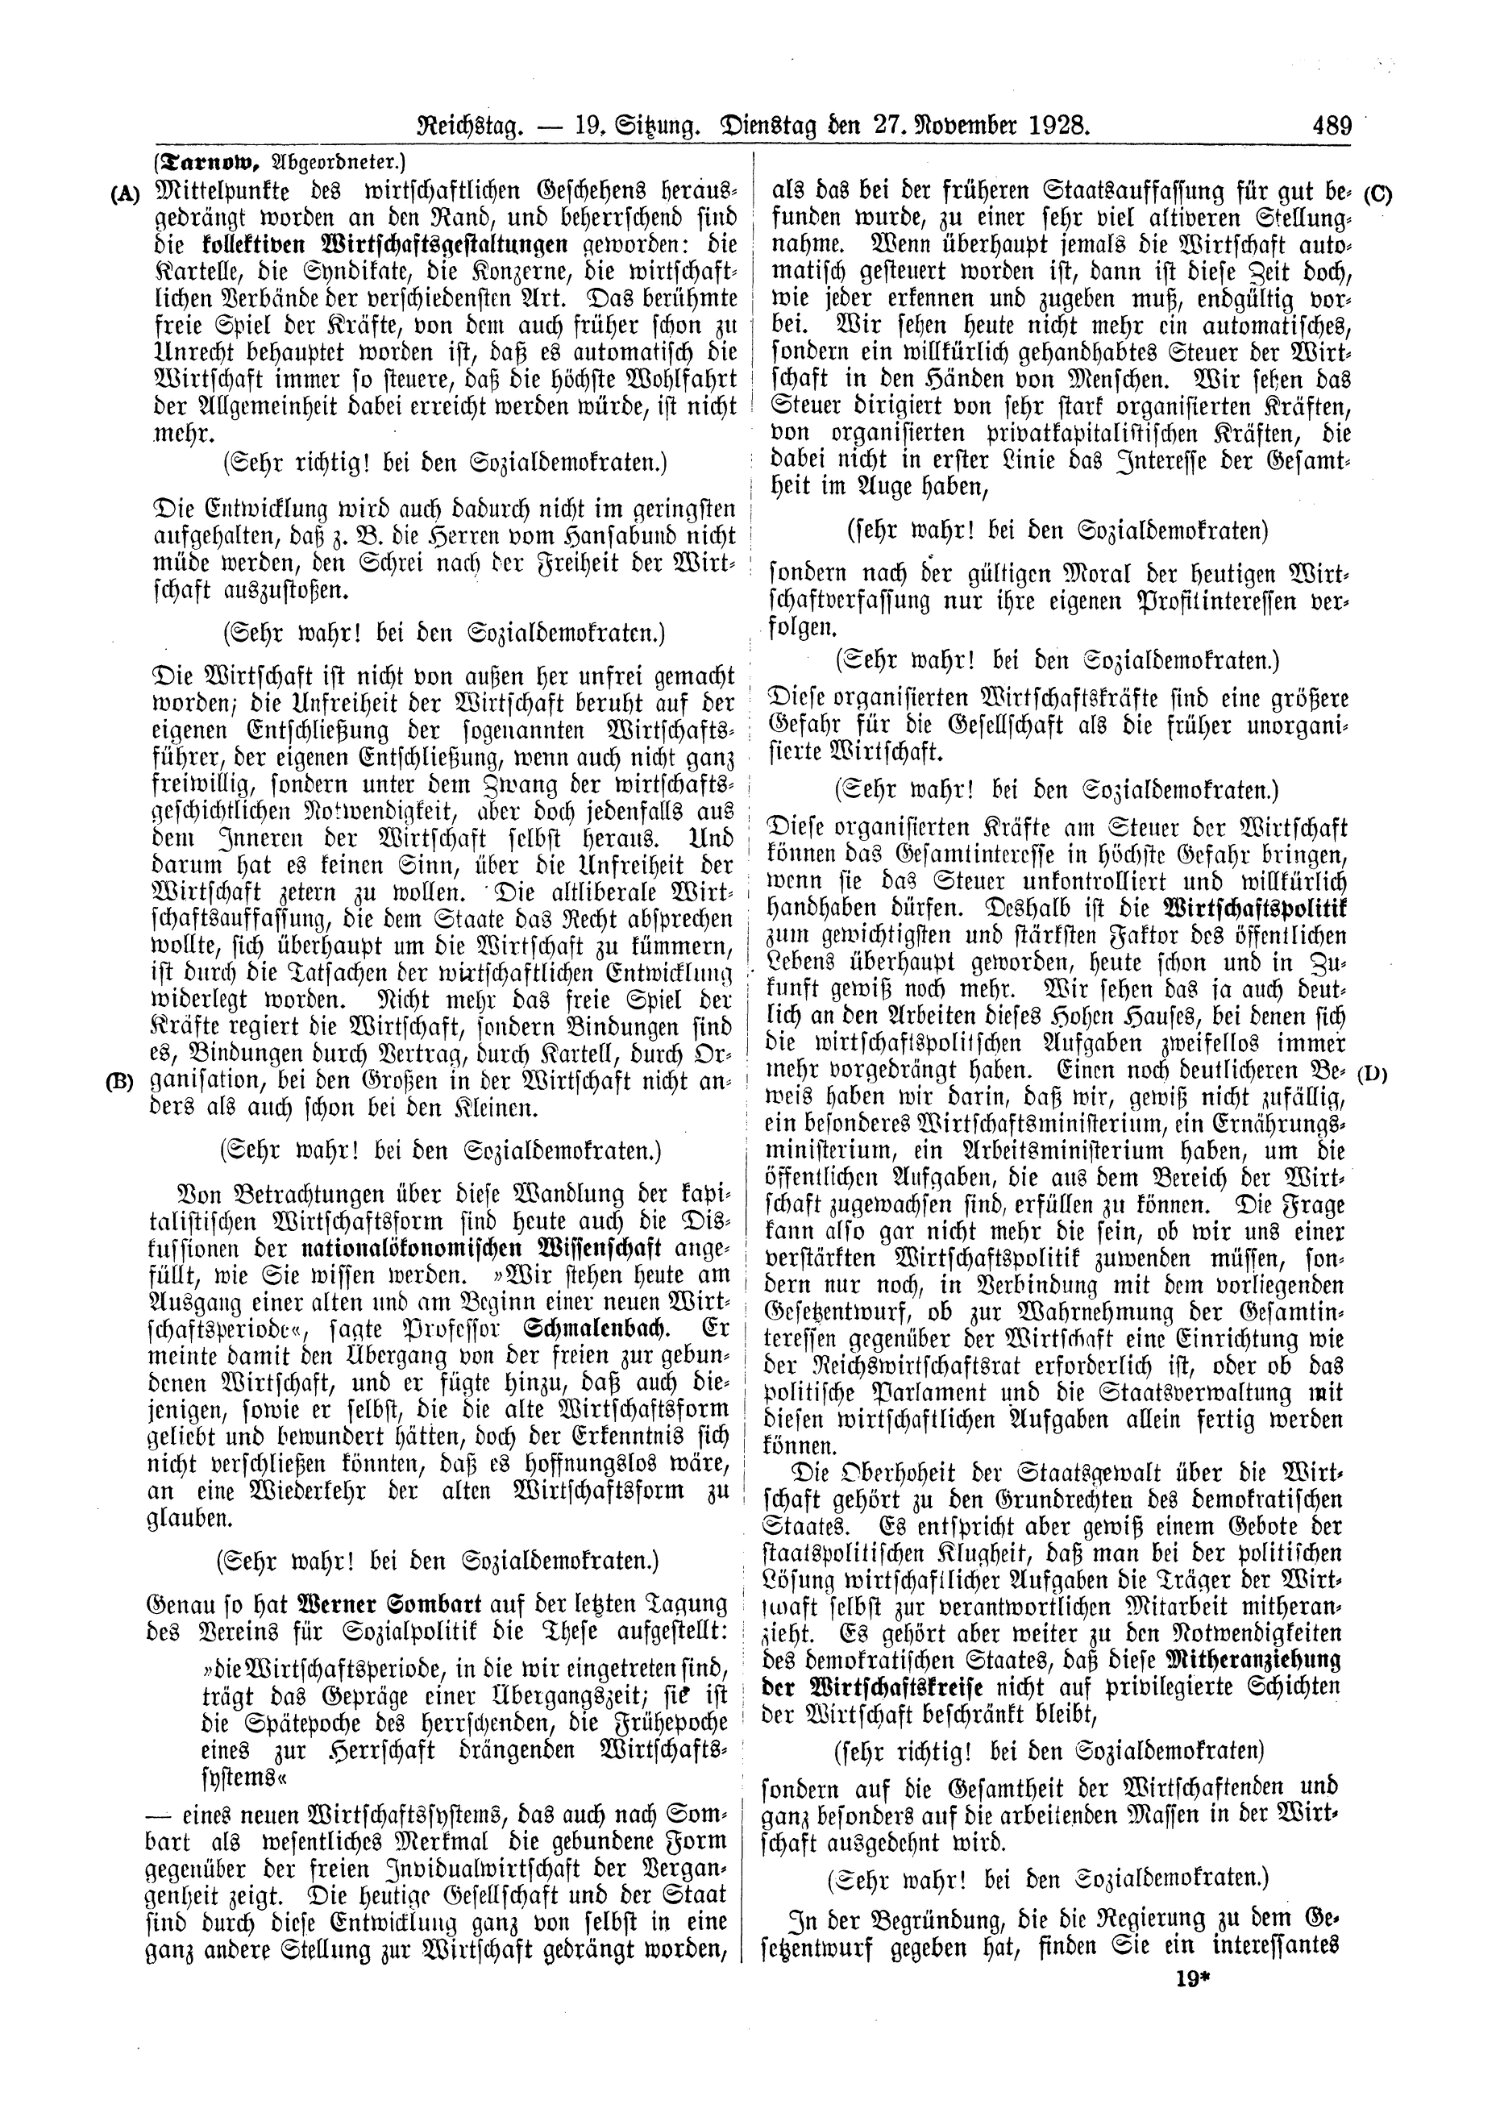 Scan of page 489